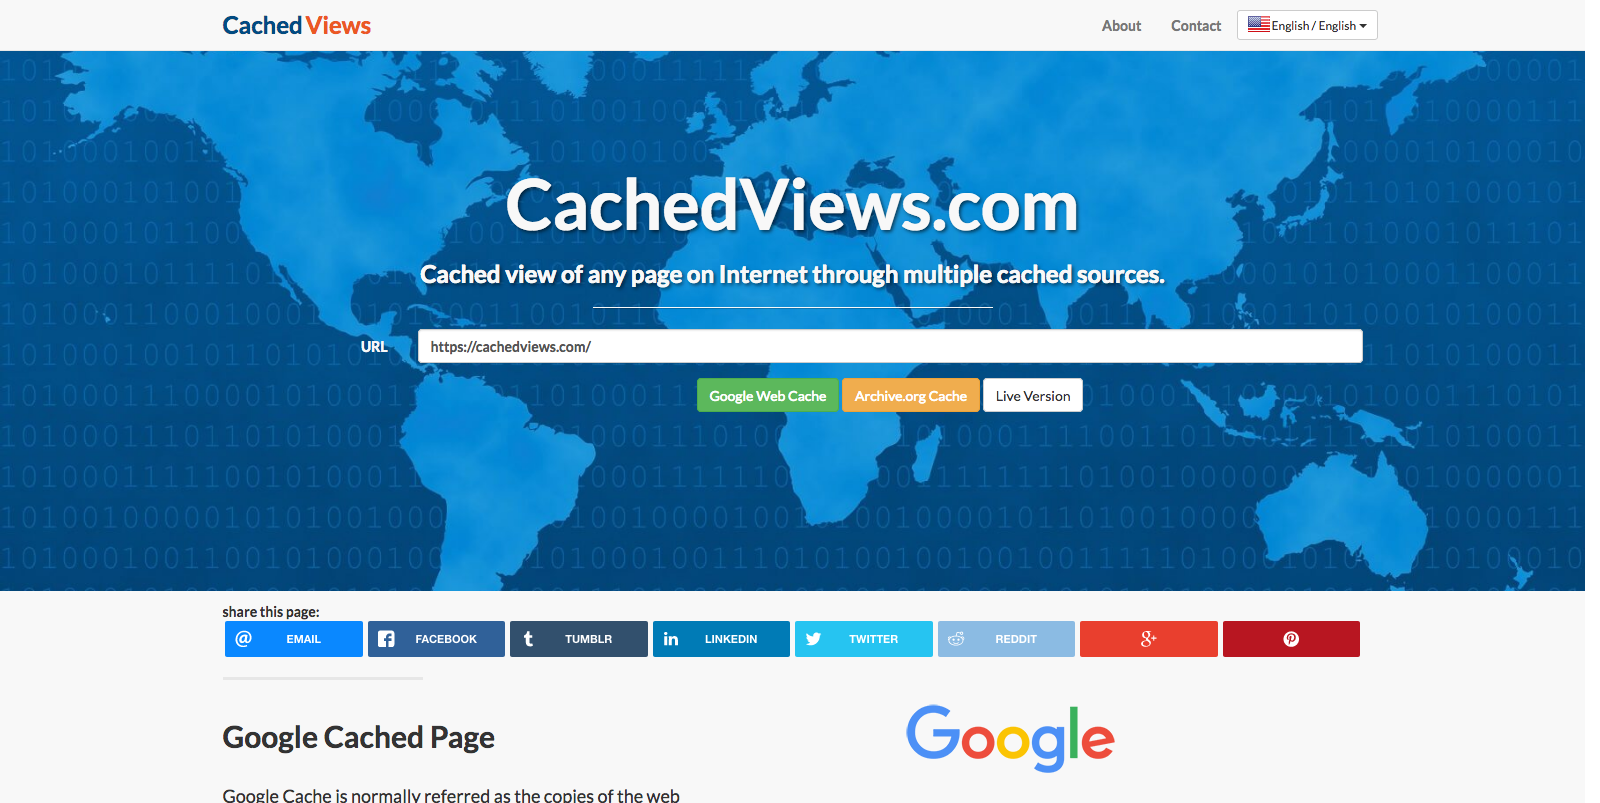 Screenshot-2018-5-16 Cache View or Cached Pages of Any Website - Google Cached Pages of Any Website - CachedViews com.png